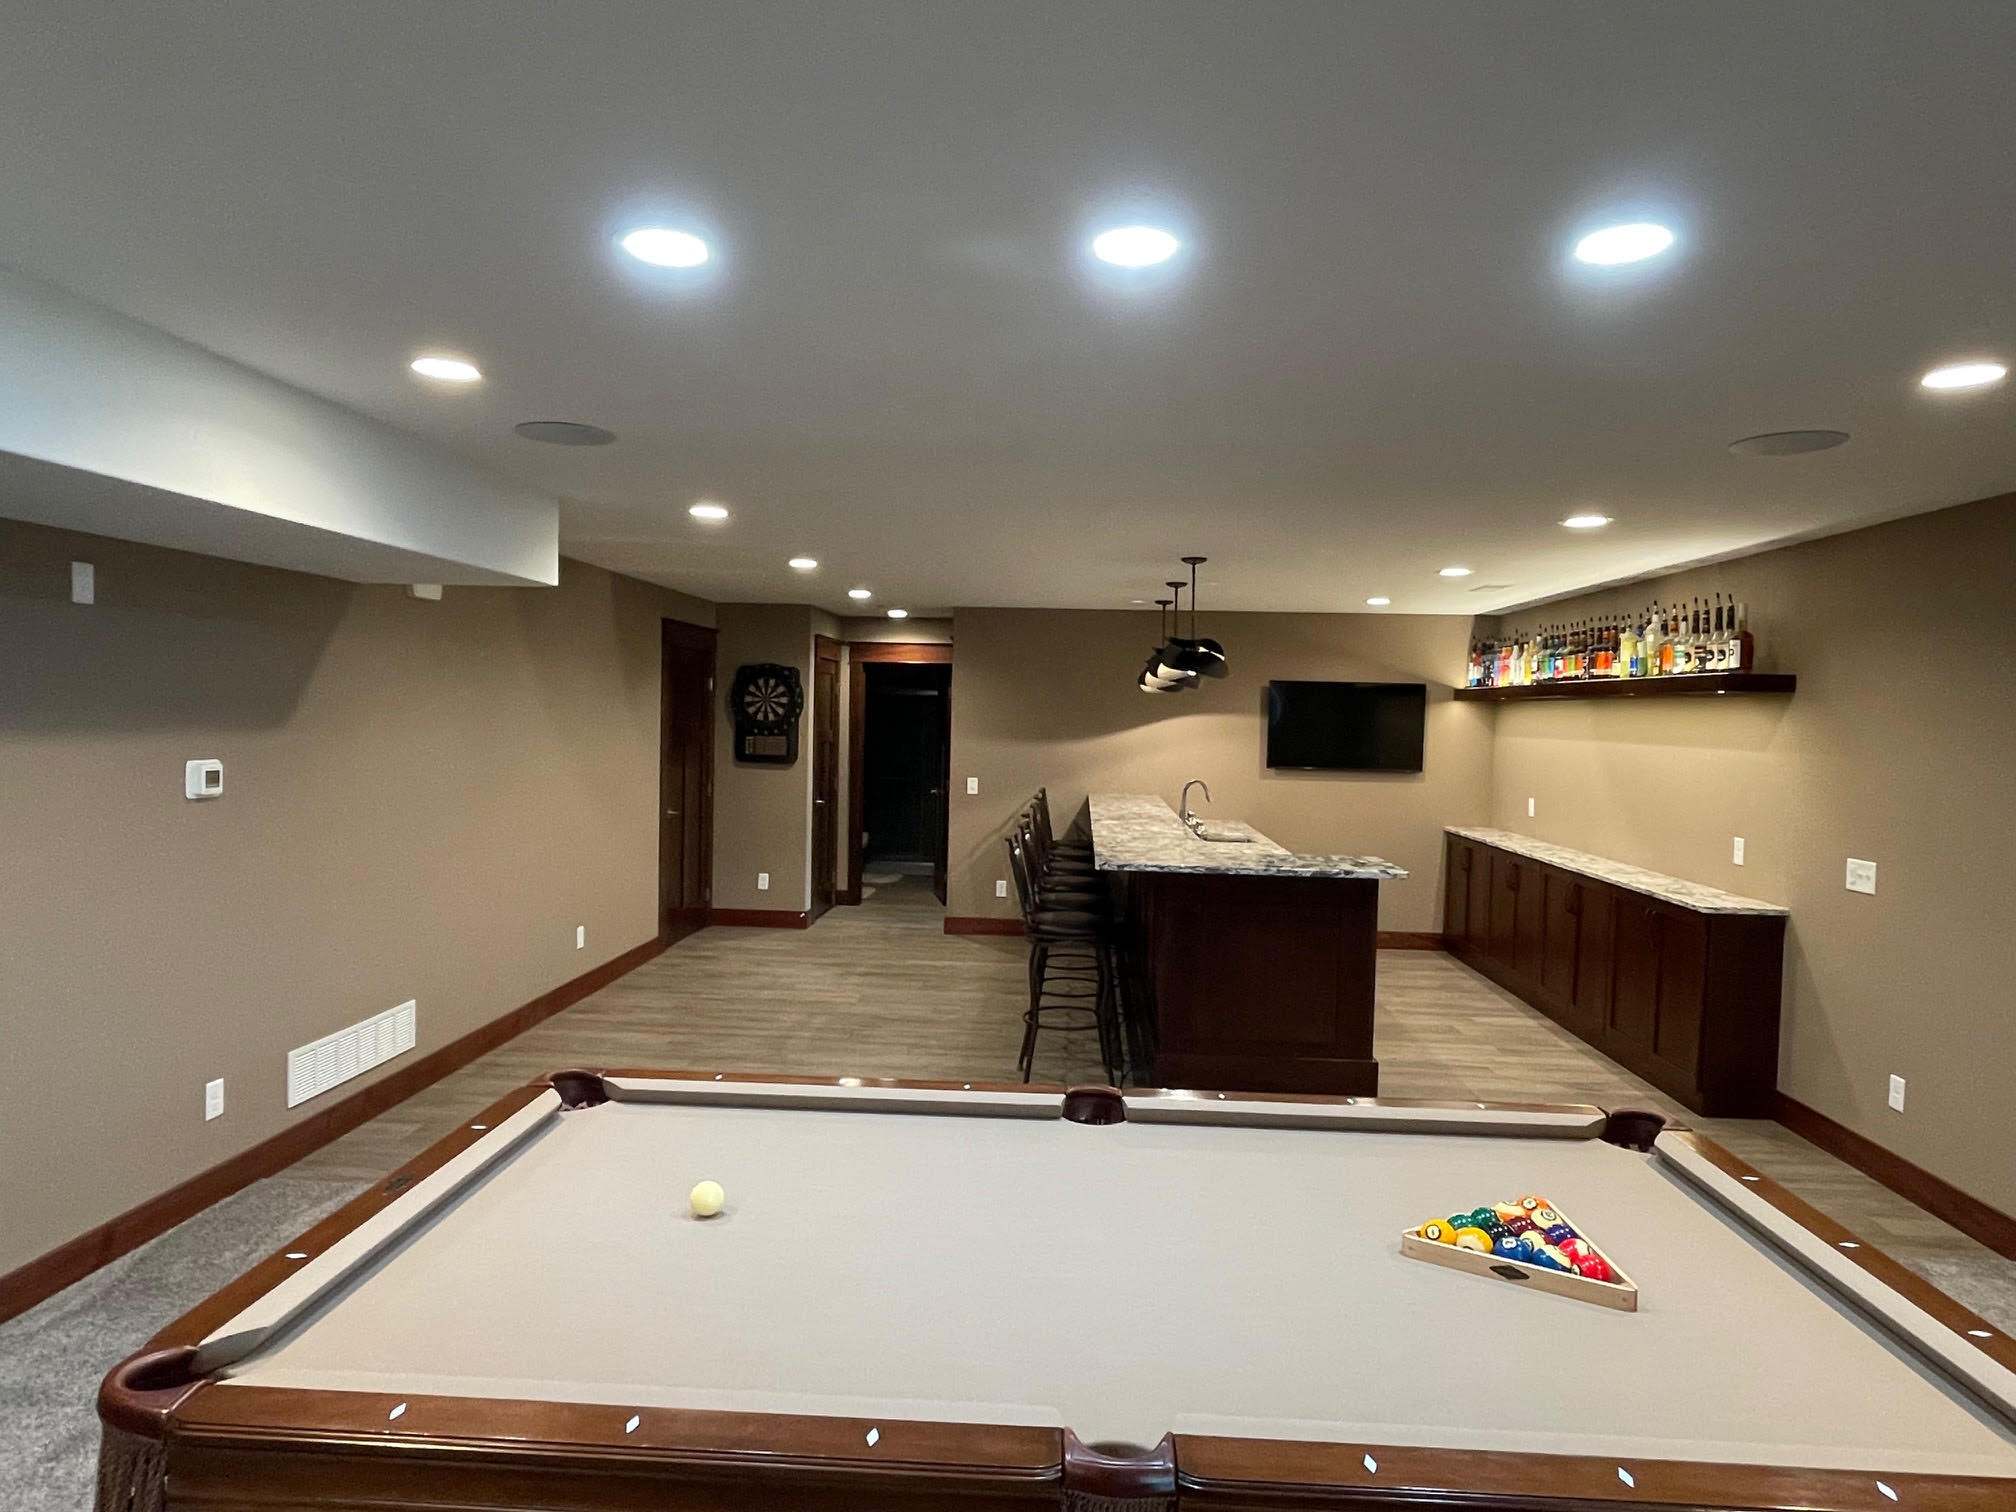 Finished basement with pool table and wet bar